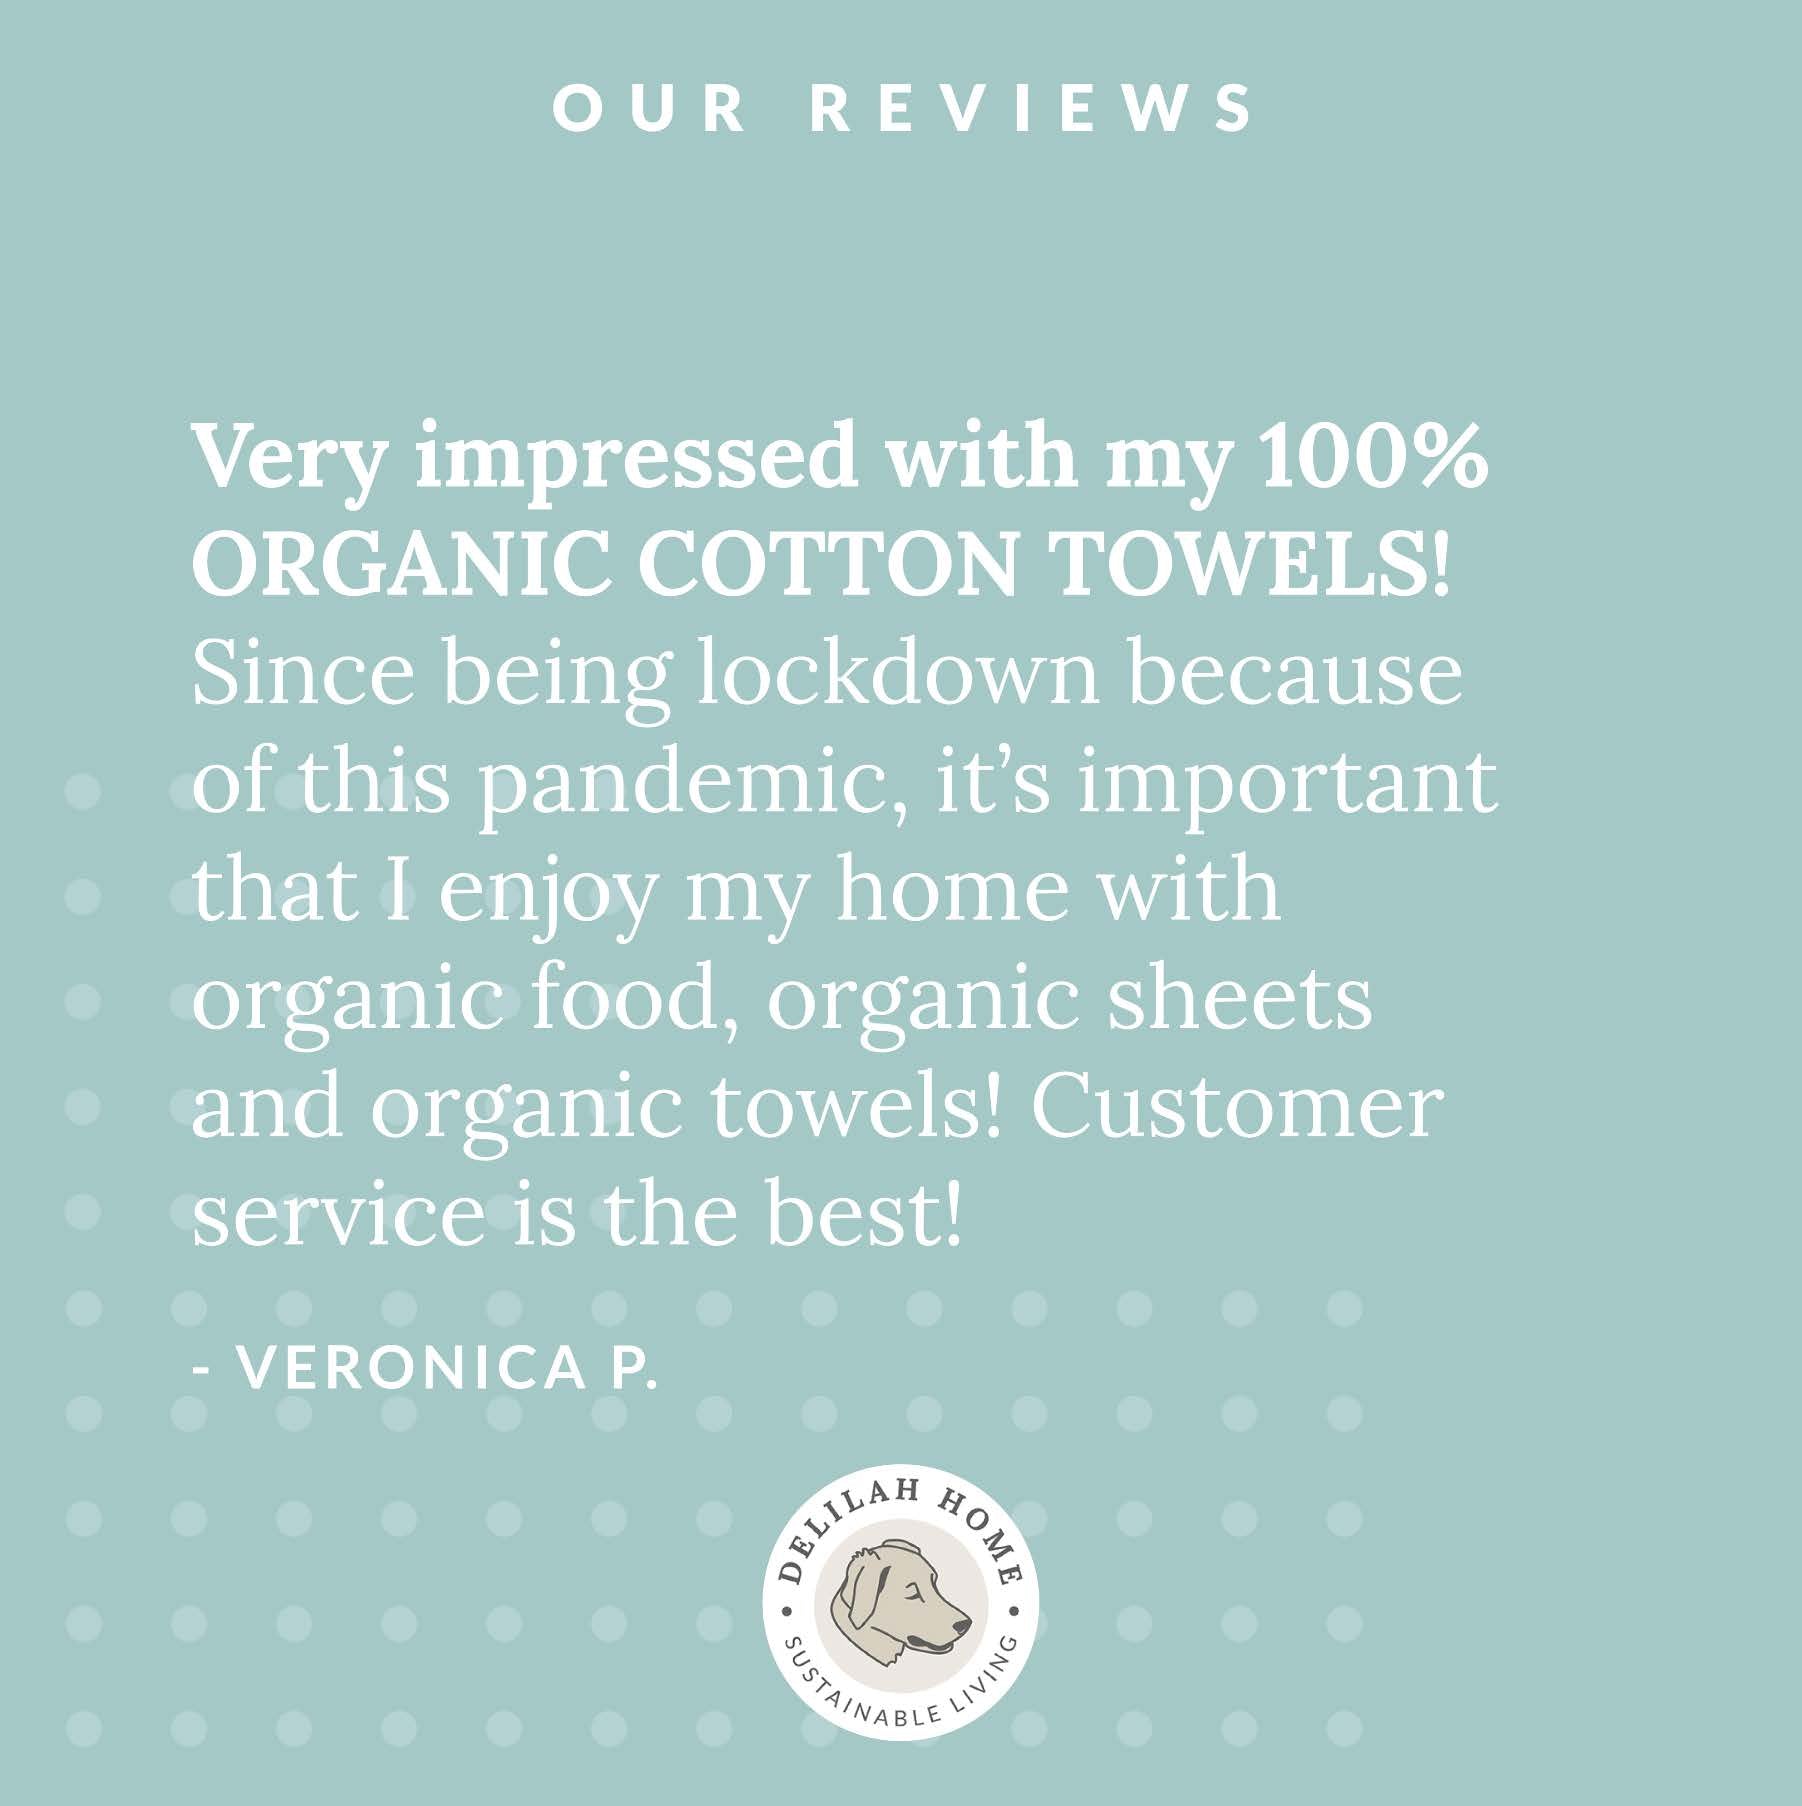 The Best Organic Bath Towel and Bedding Company